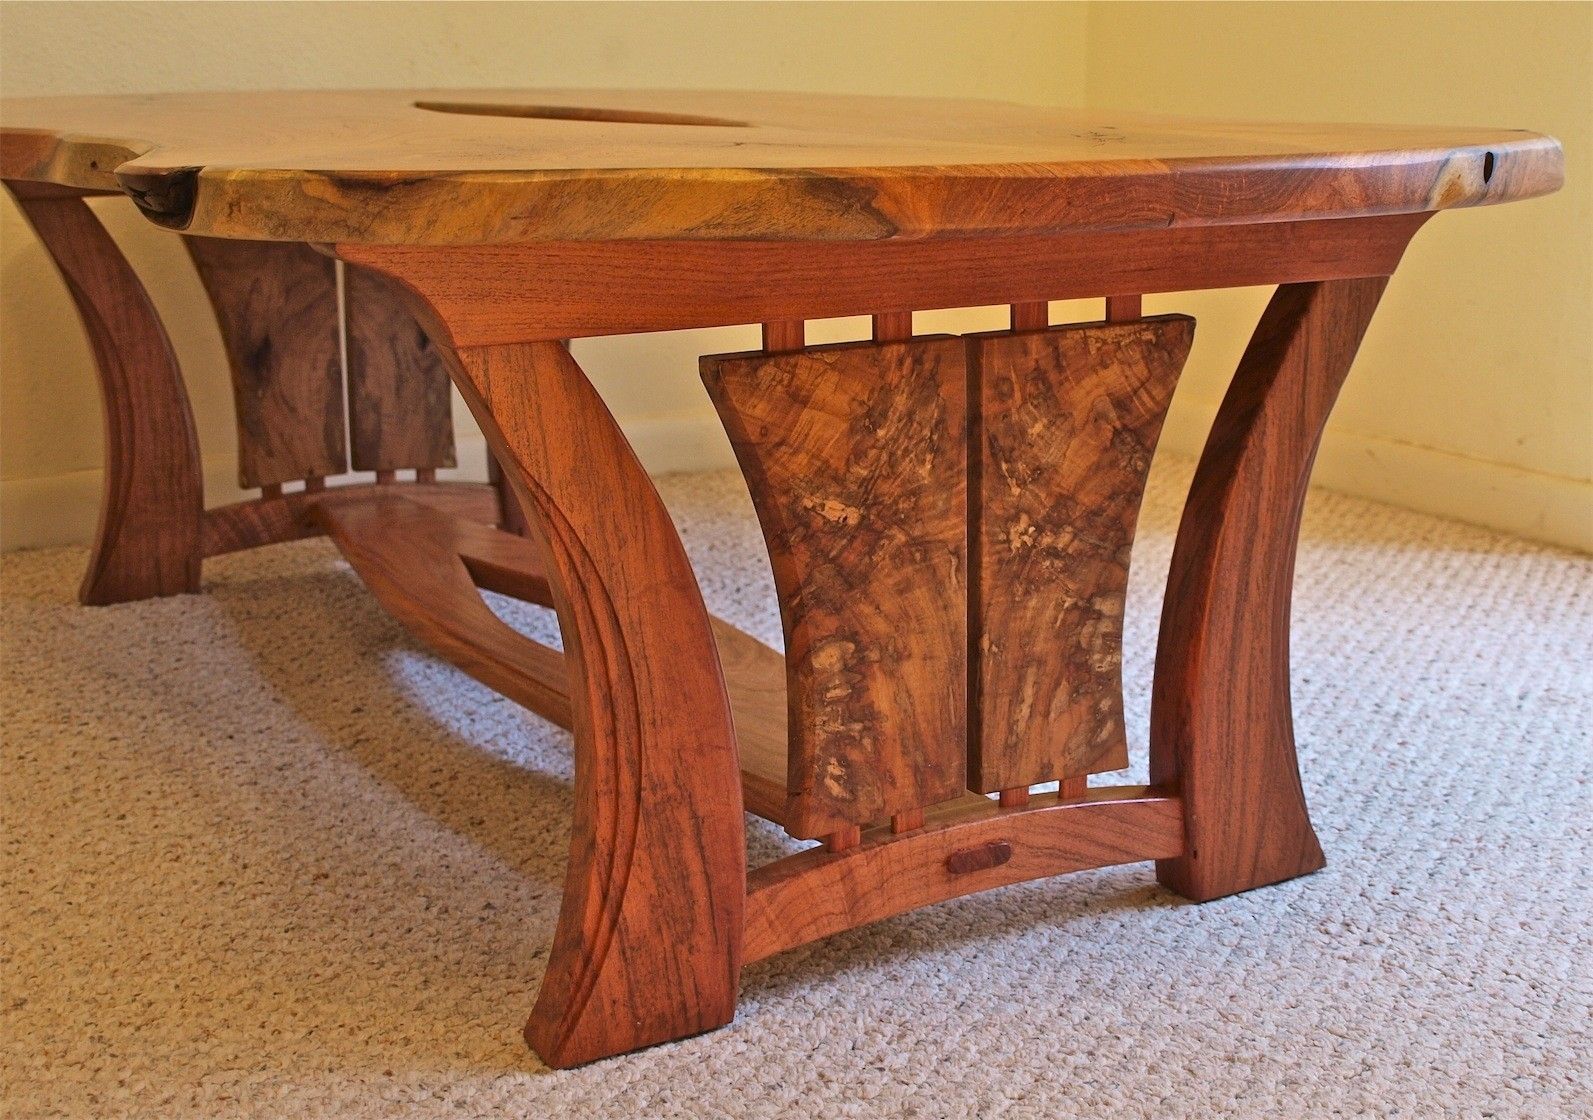 mesquite wood kitchen table